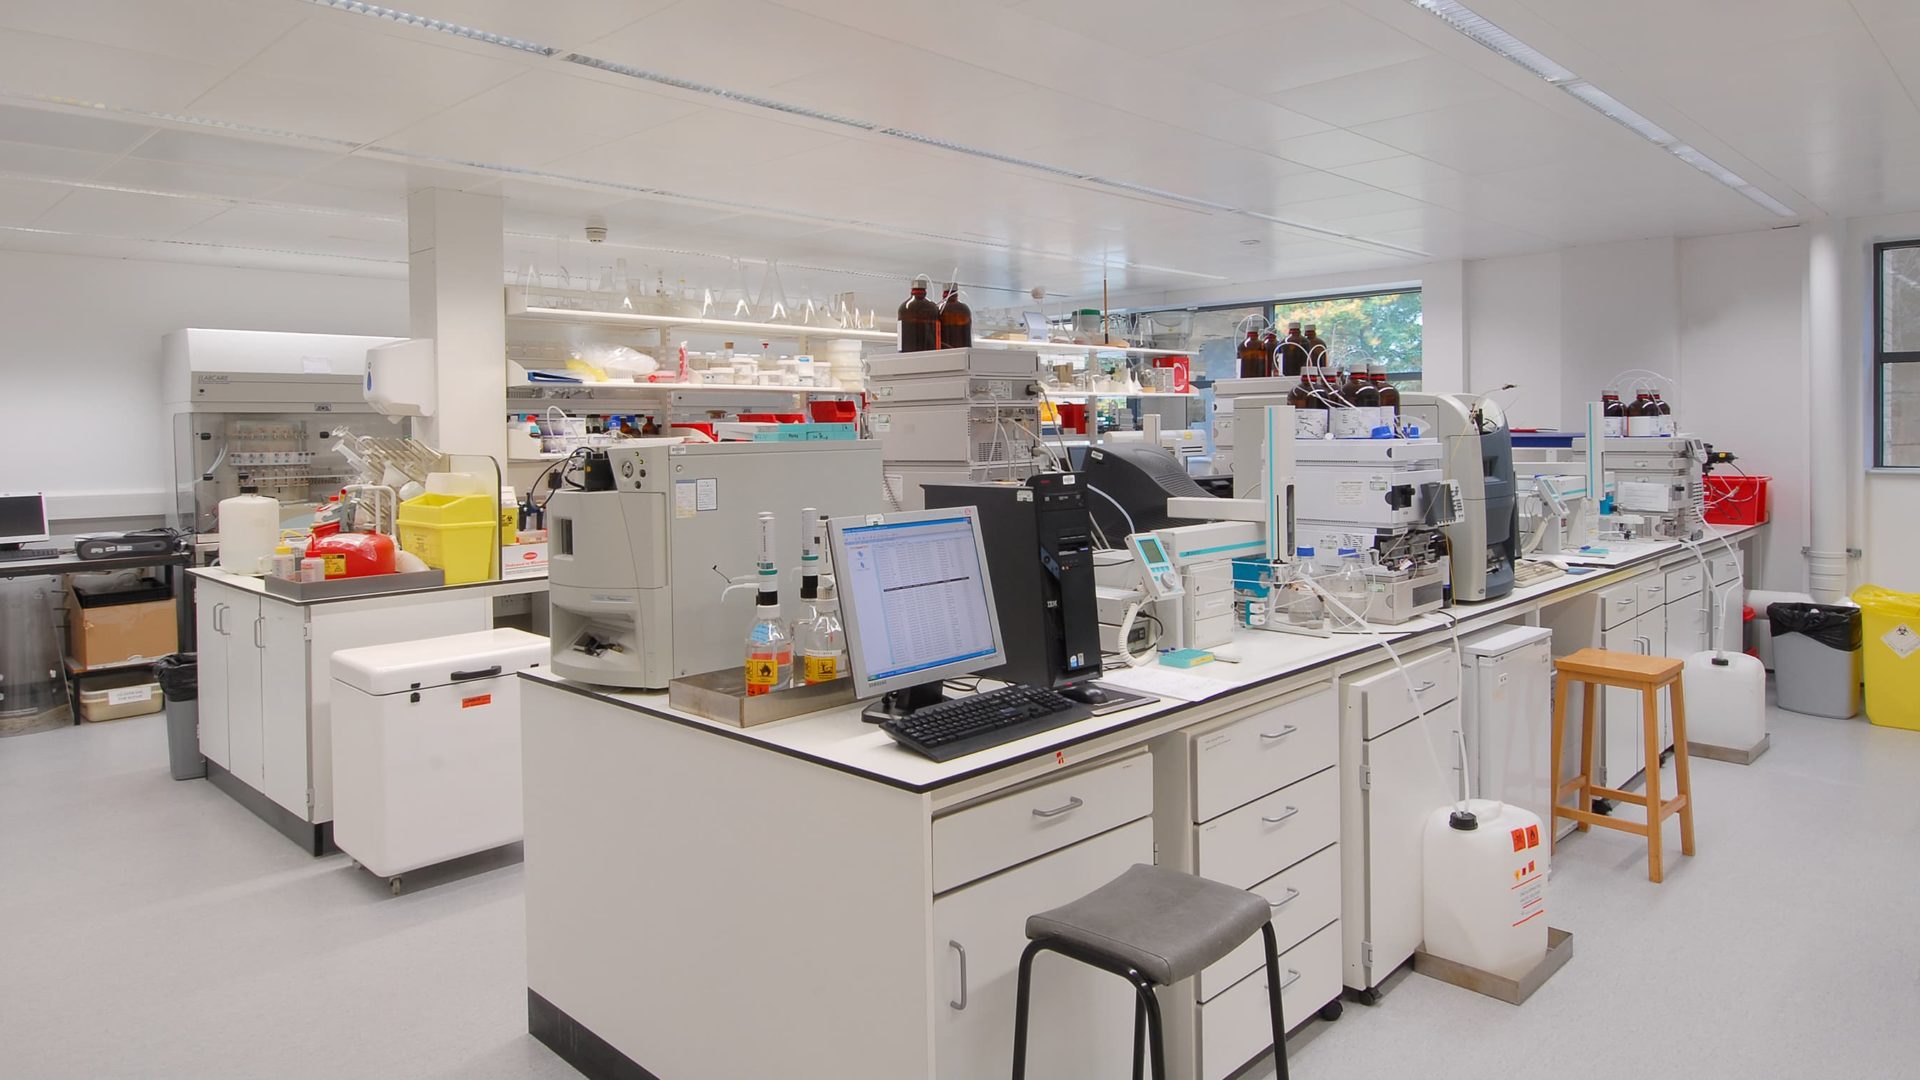 babraham research campus laboratory with equipment